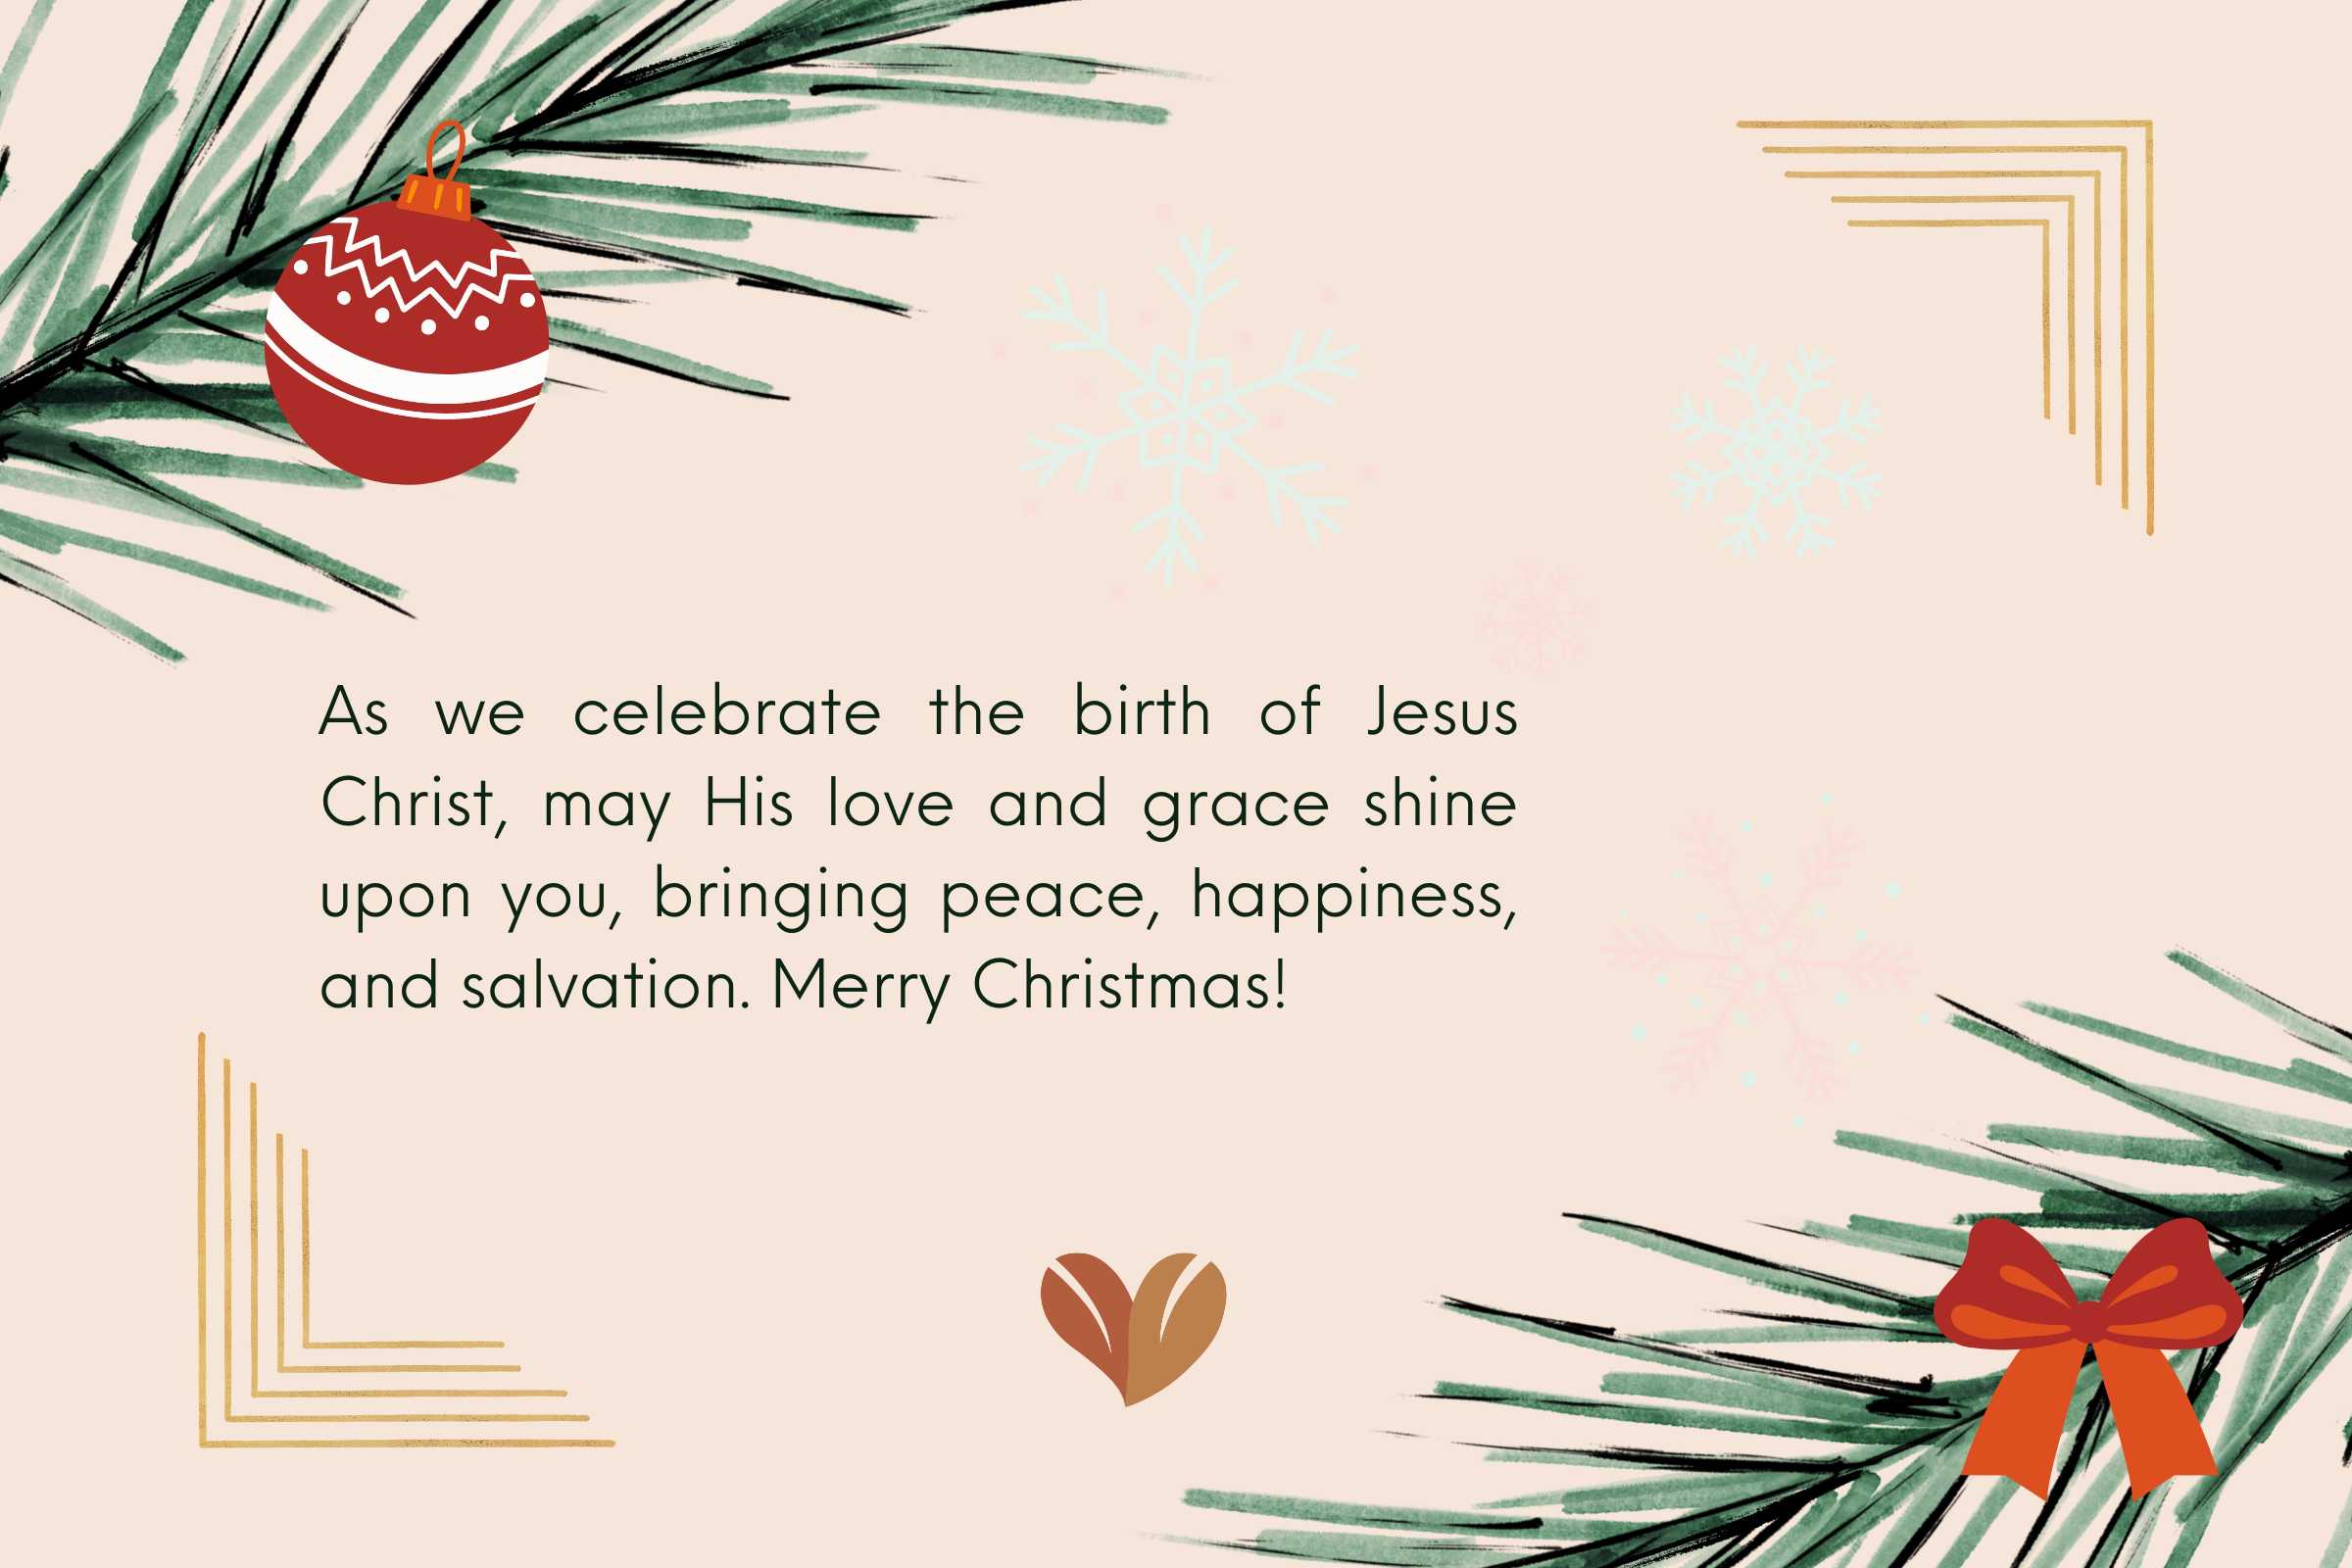 Wishing you a blessed Christmas